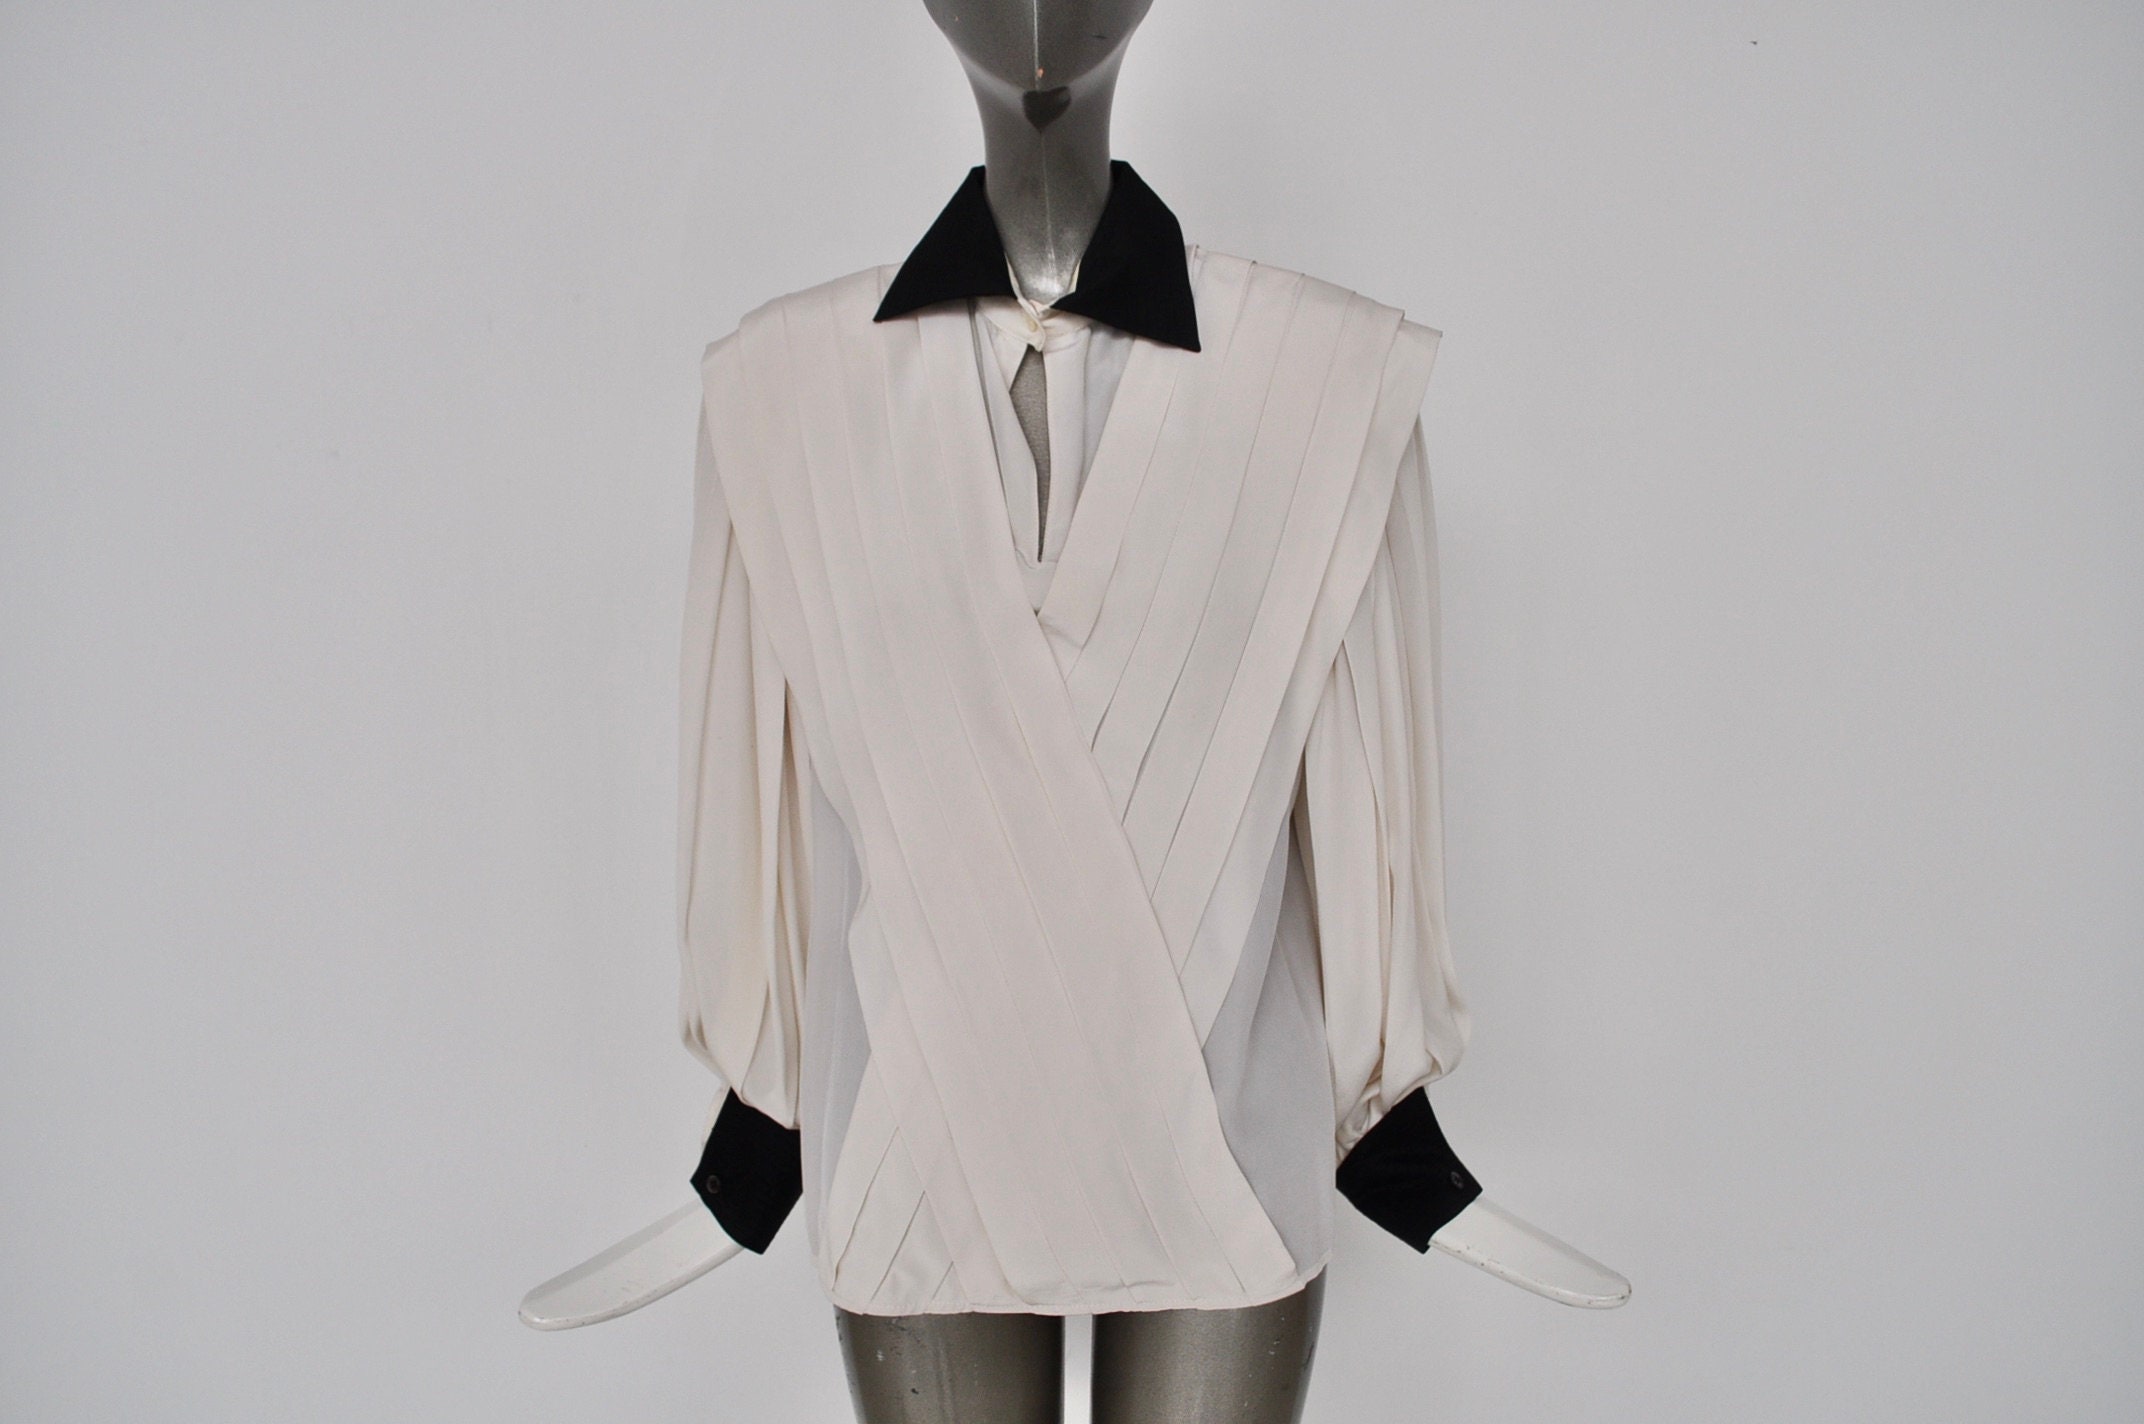 Gianfranco Ferre Blouse From the 80s - Etsy